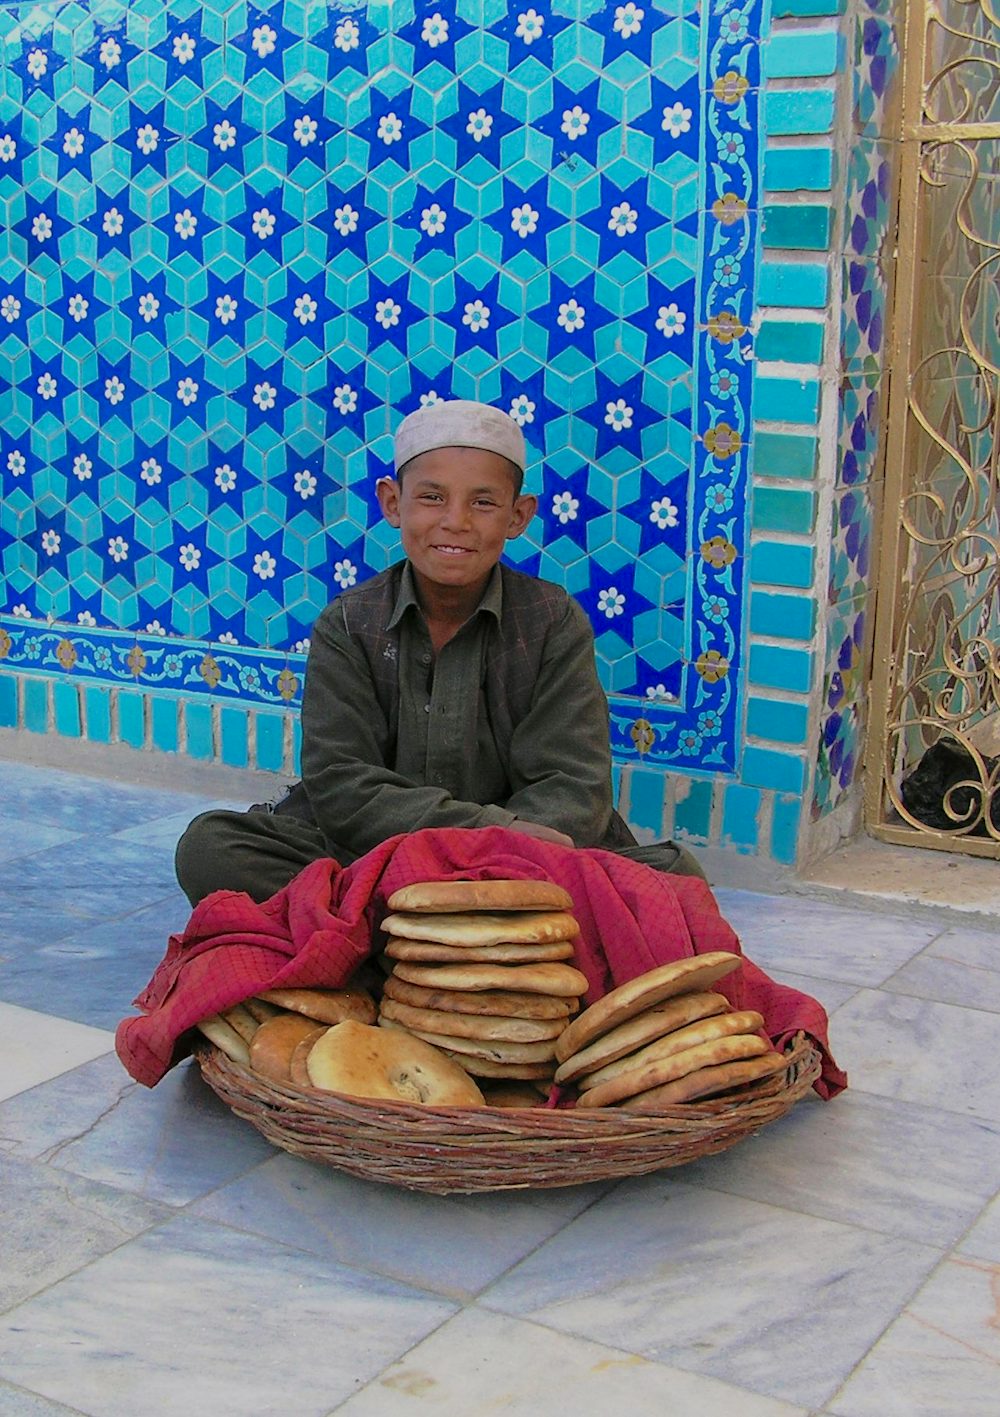 Young boy selling bread at the Blue Mosque in Mazar e Sharif. This round Afghan naan bread is typical of the northern part of the country. In Kabu, the bread is an elongated oval (caption and photos by David Sherman).